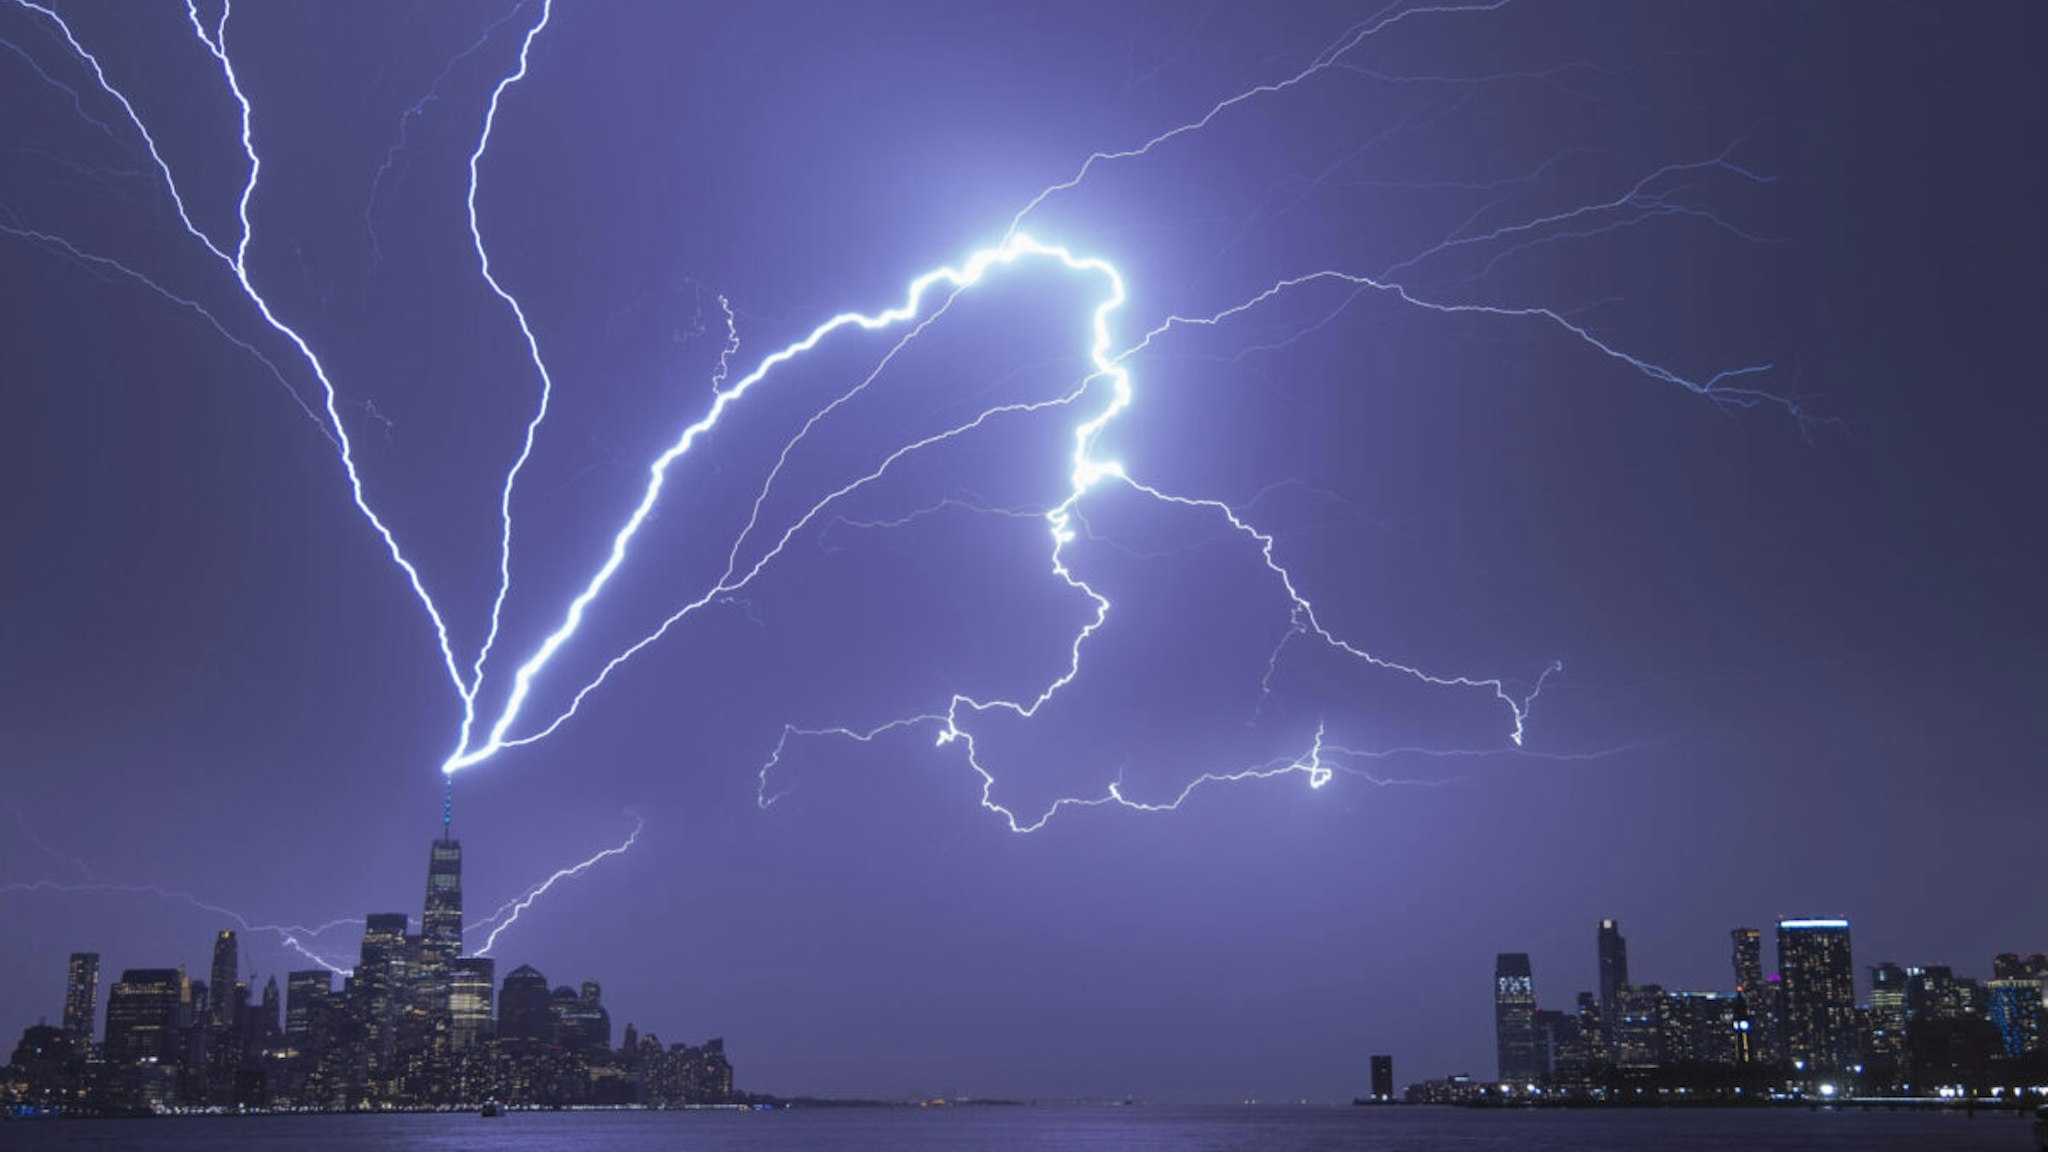 HOBOKEN, NJ - APRIL 1: Lightning bolts strike One World Trade Center in New York City as it fans out over the Hudson River and Jersey City, New Jersey during a thunderstorm on April 1, 2023, as seen from Hoboken, New Jersey.